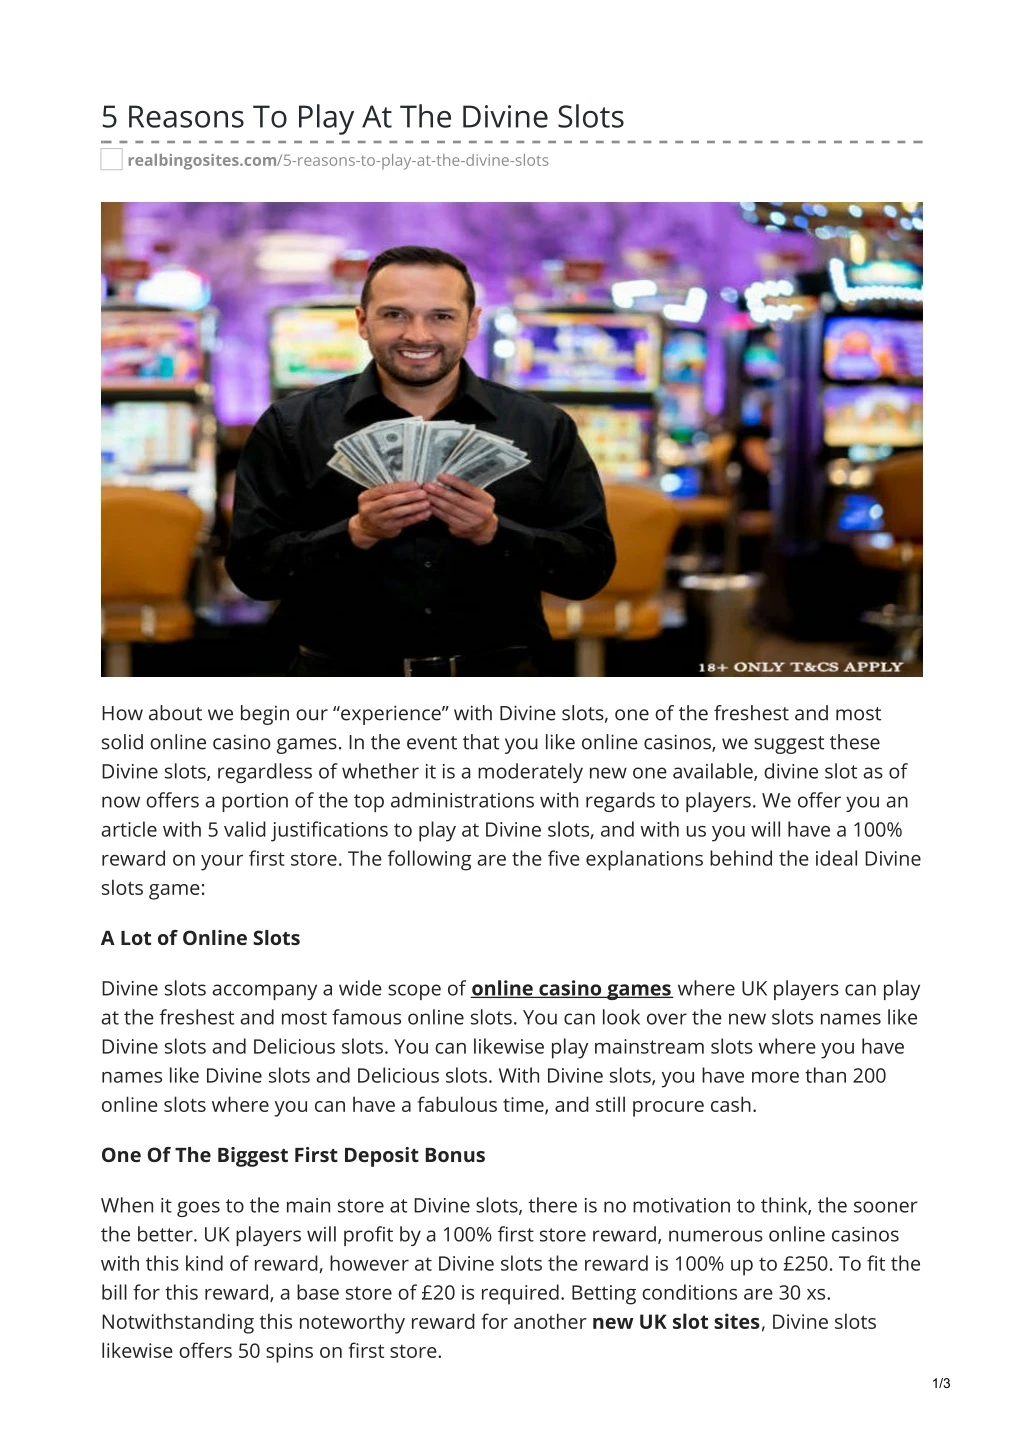 5 reasons to play at the divine slots